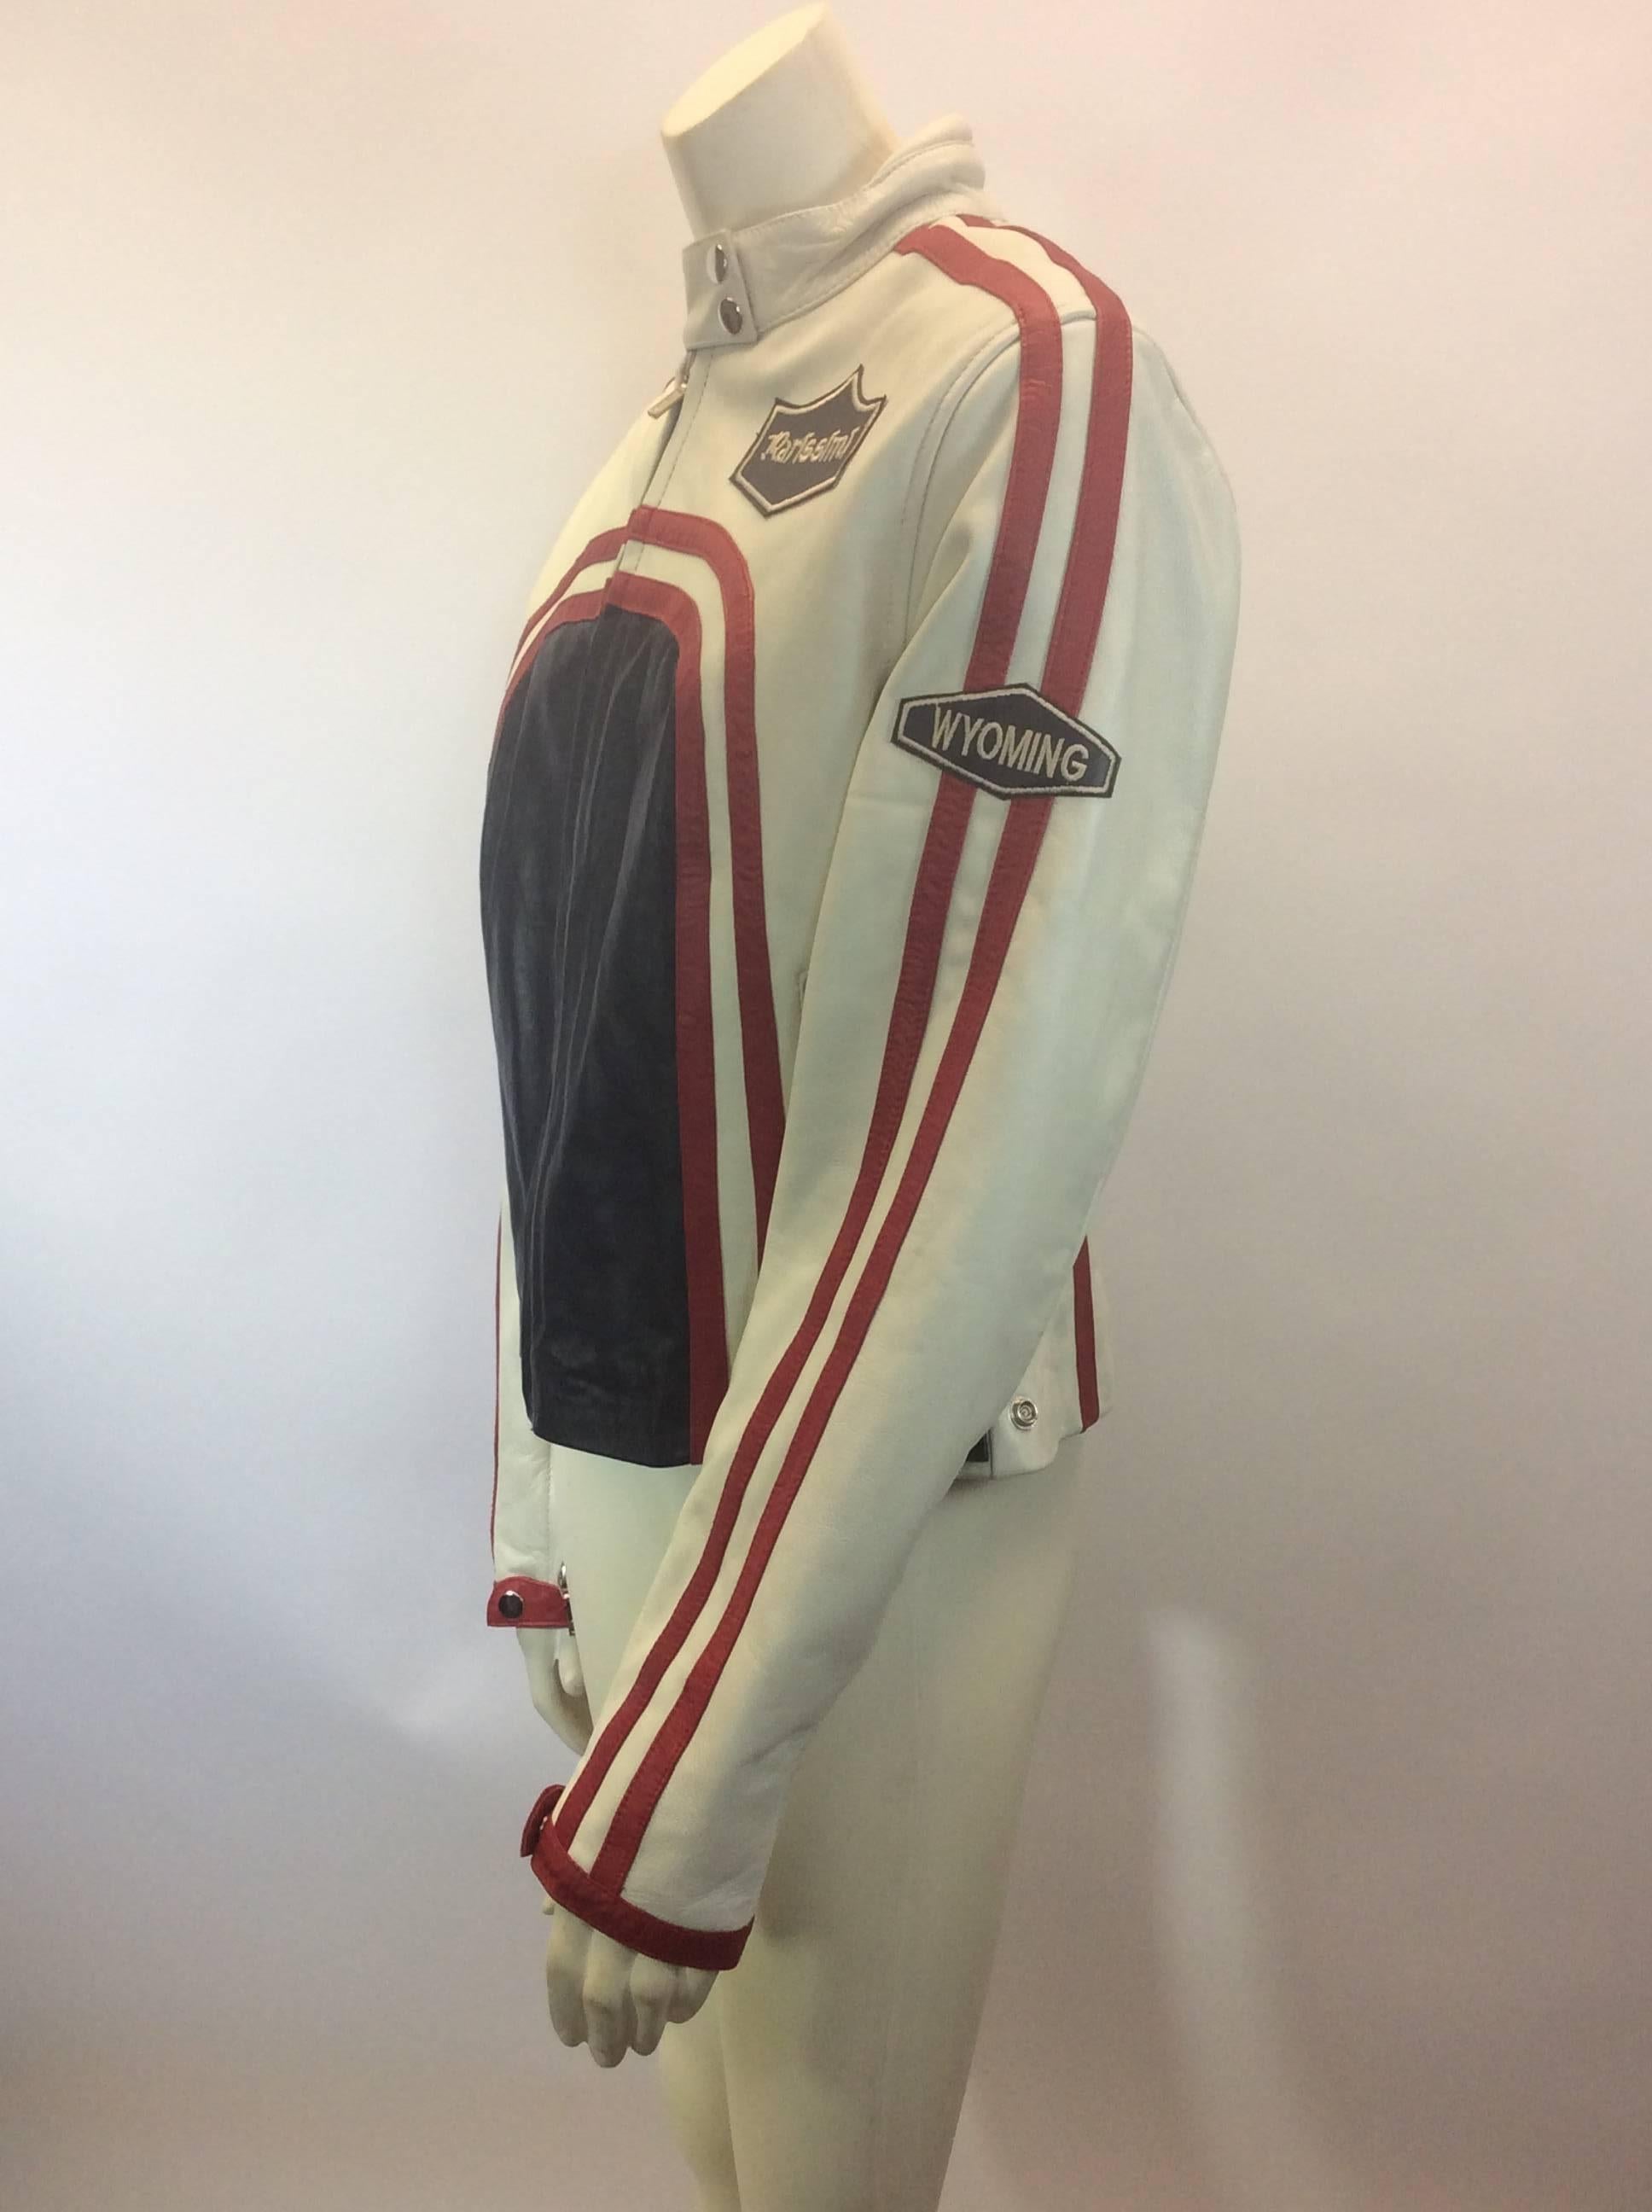 Feminin Touch White and Red Leather Moto Jacket
Size XL/16 (junior fit)
$178
Leather Exterior, Polyester Interior